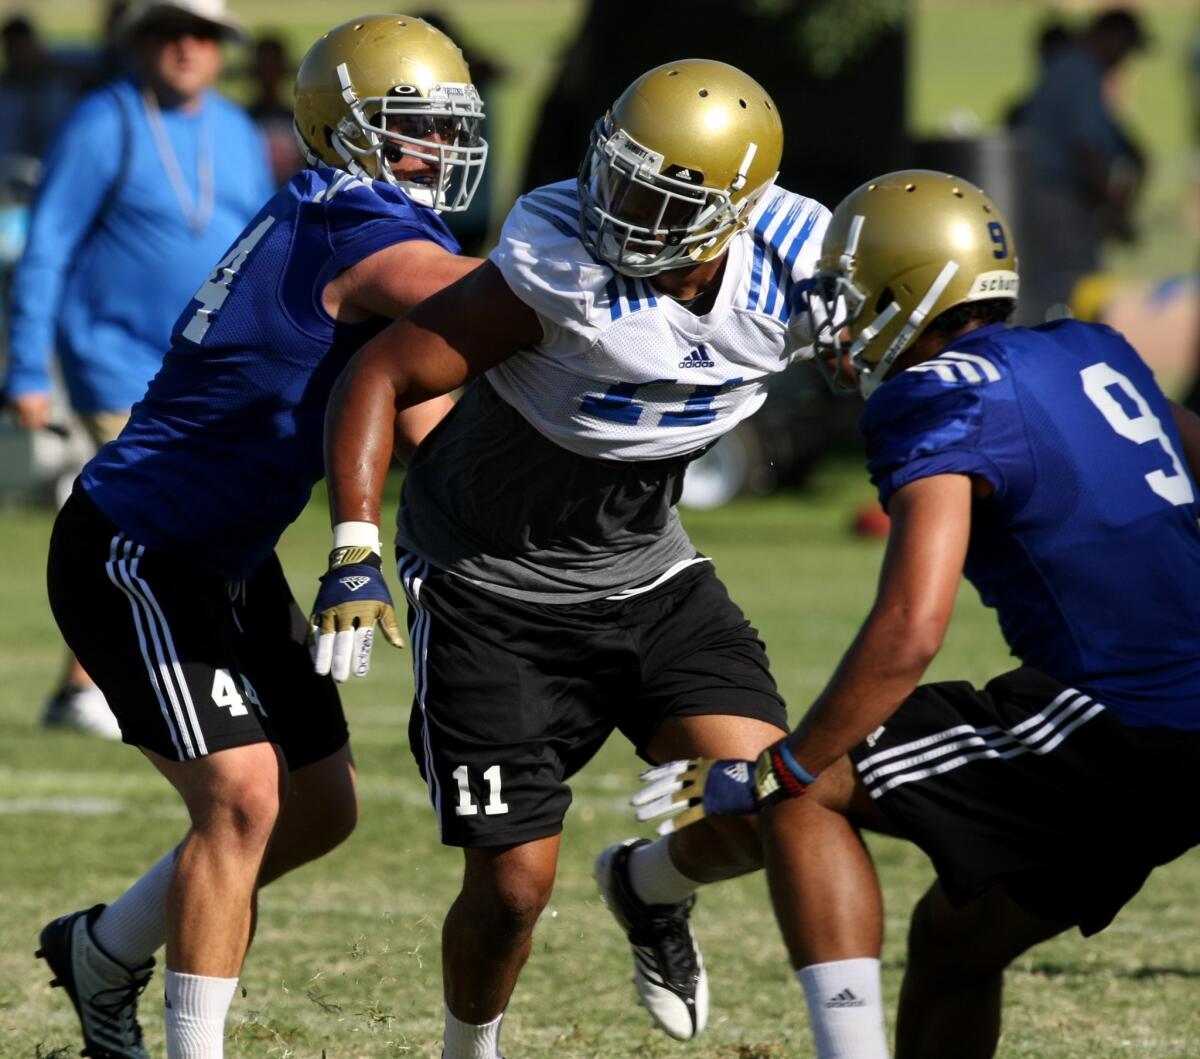 UCLA's Anthony Barr will play in the Bruins' season opener against Nevada on Saturday despite leaving practice last week with an undetermined injury.